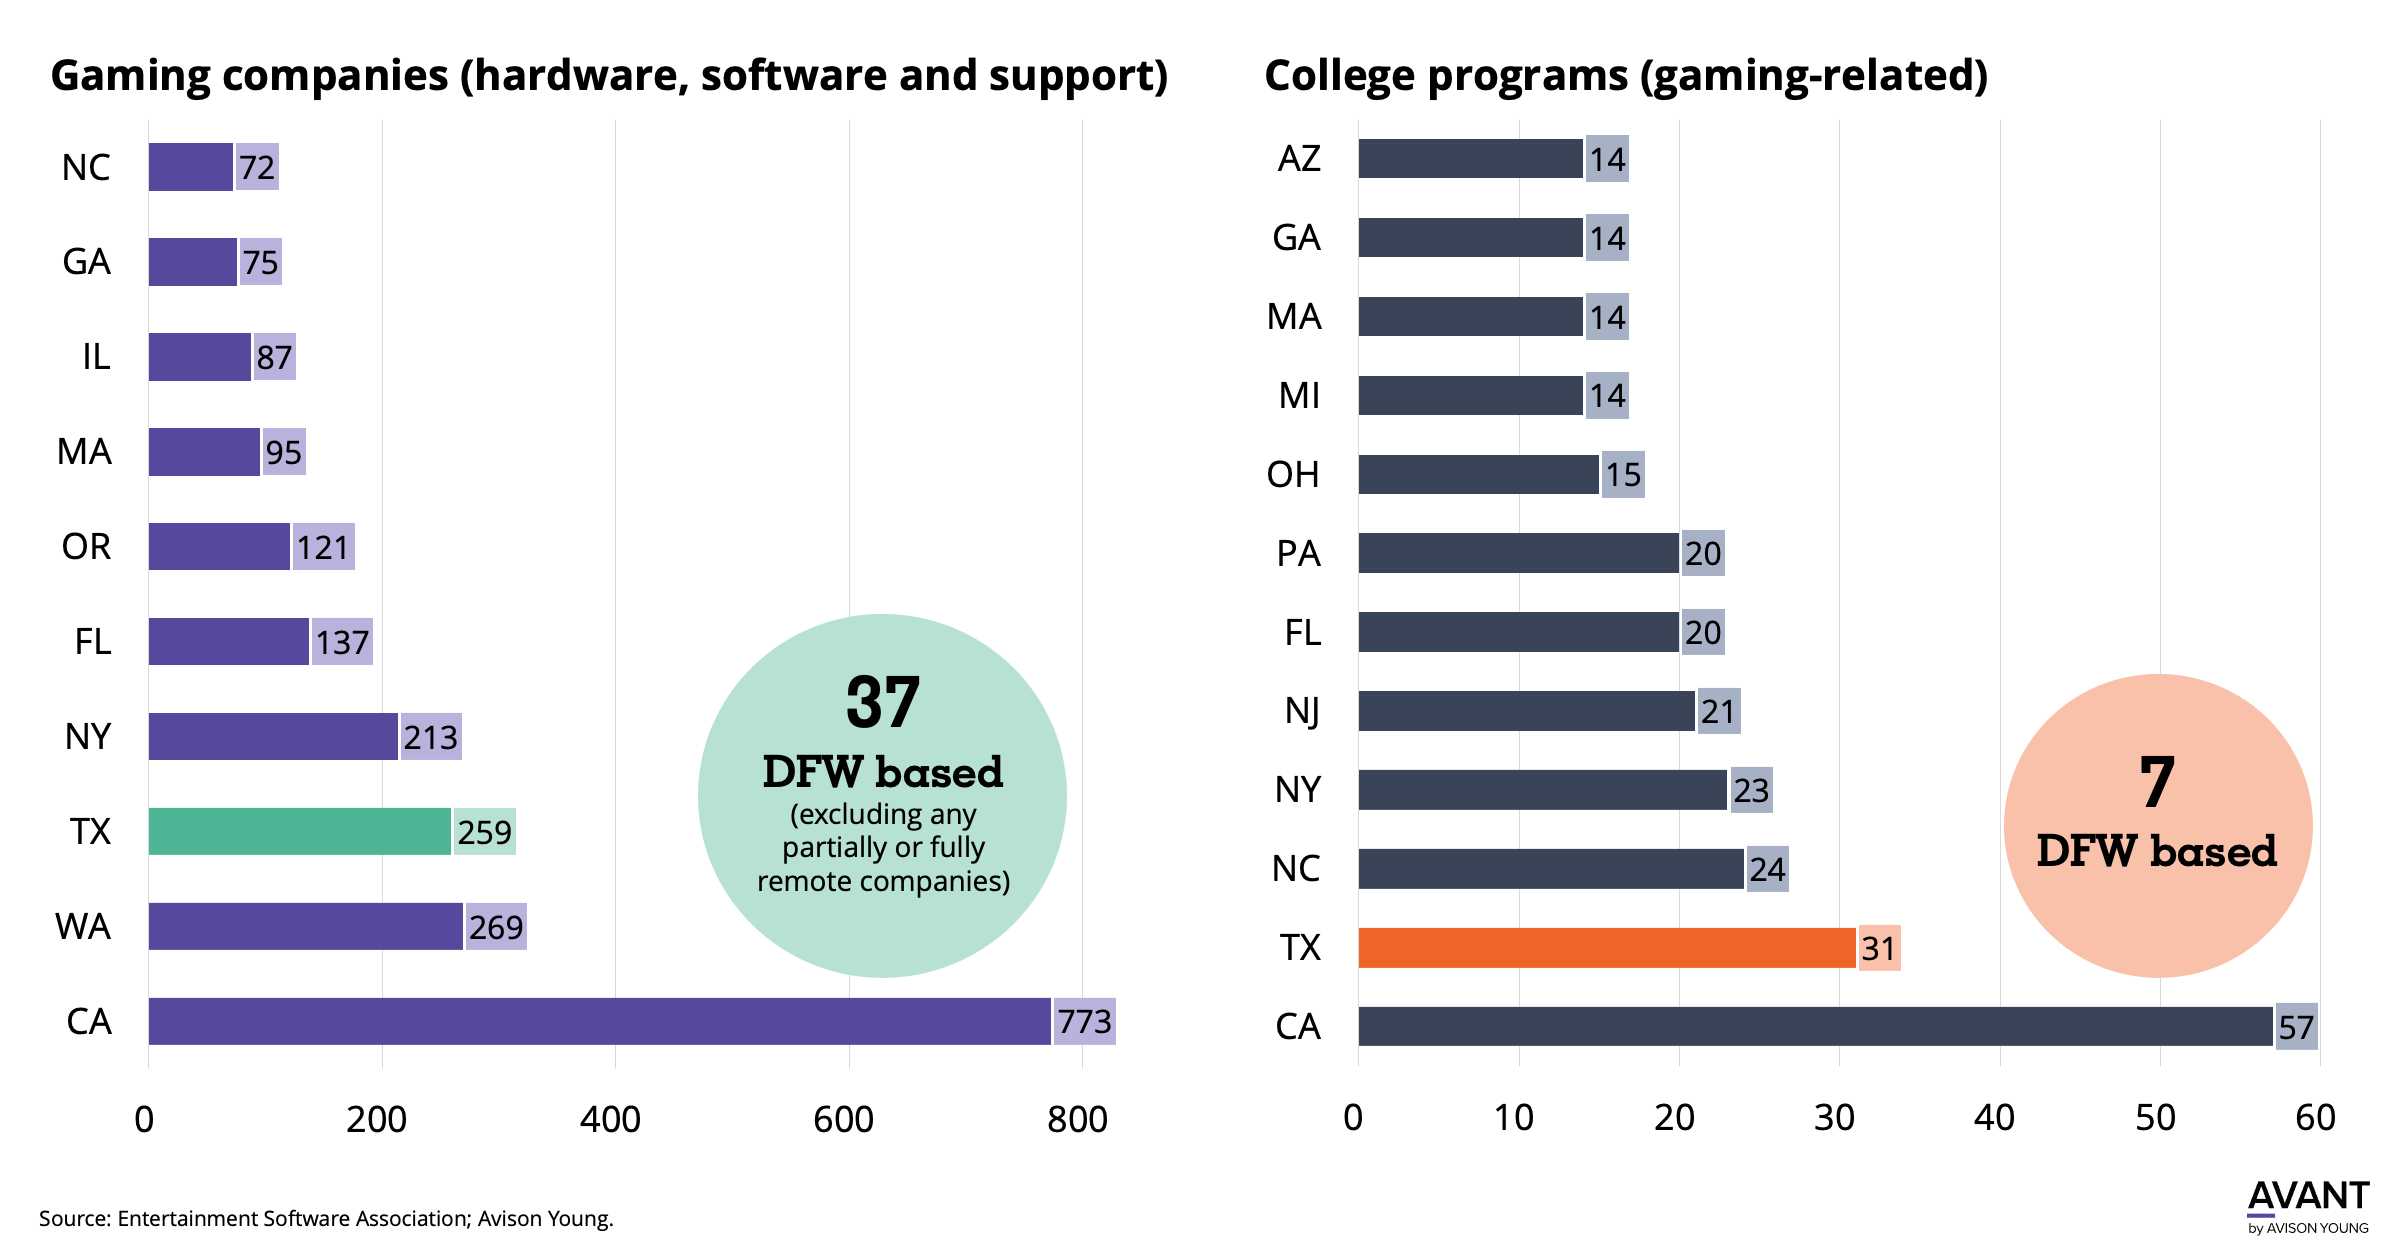 Gaming companies and gaming-related college programs by state